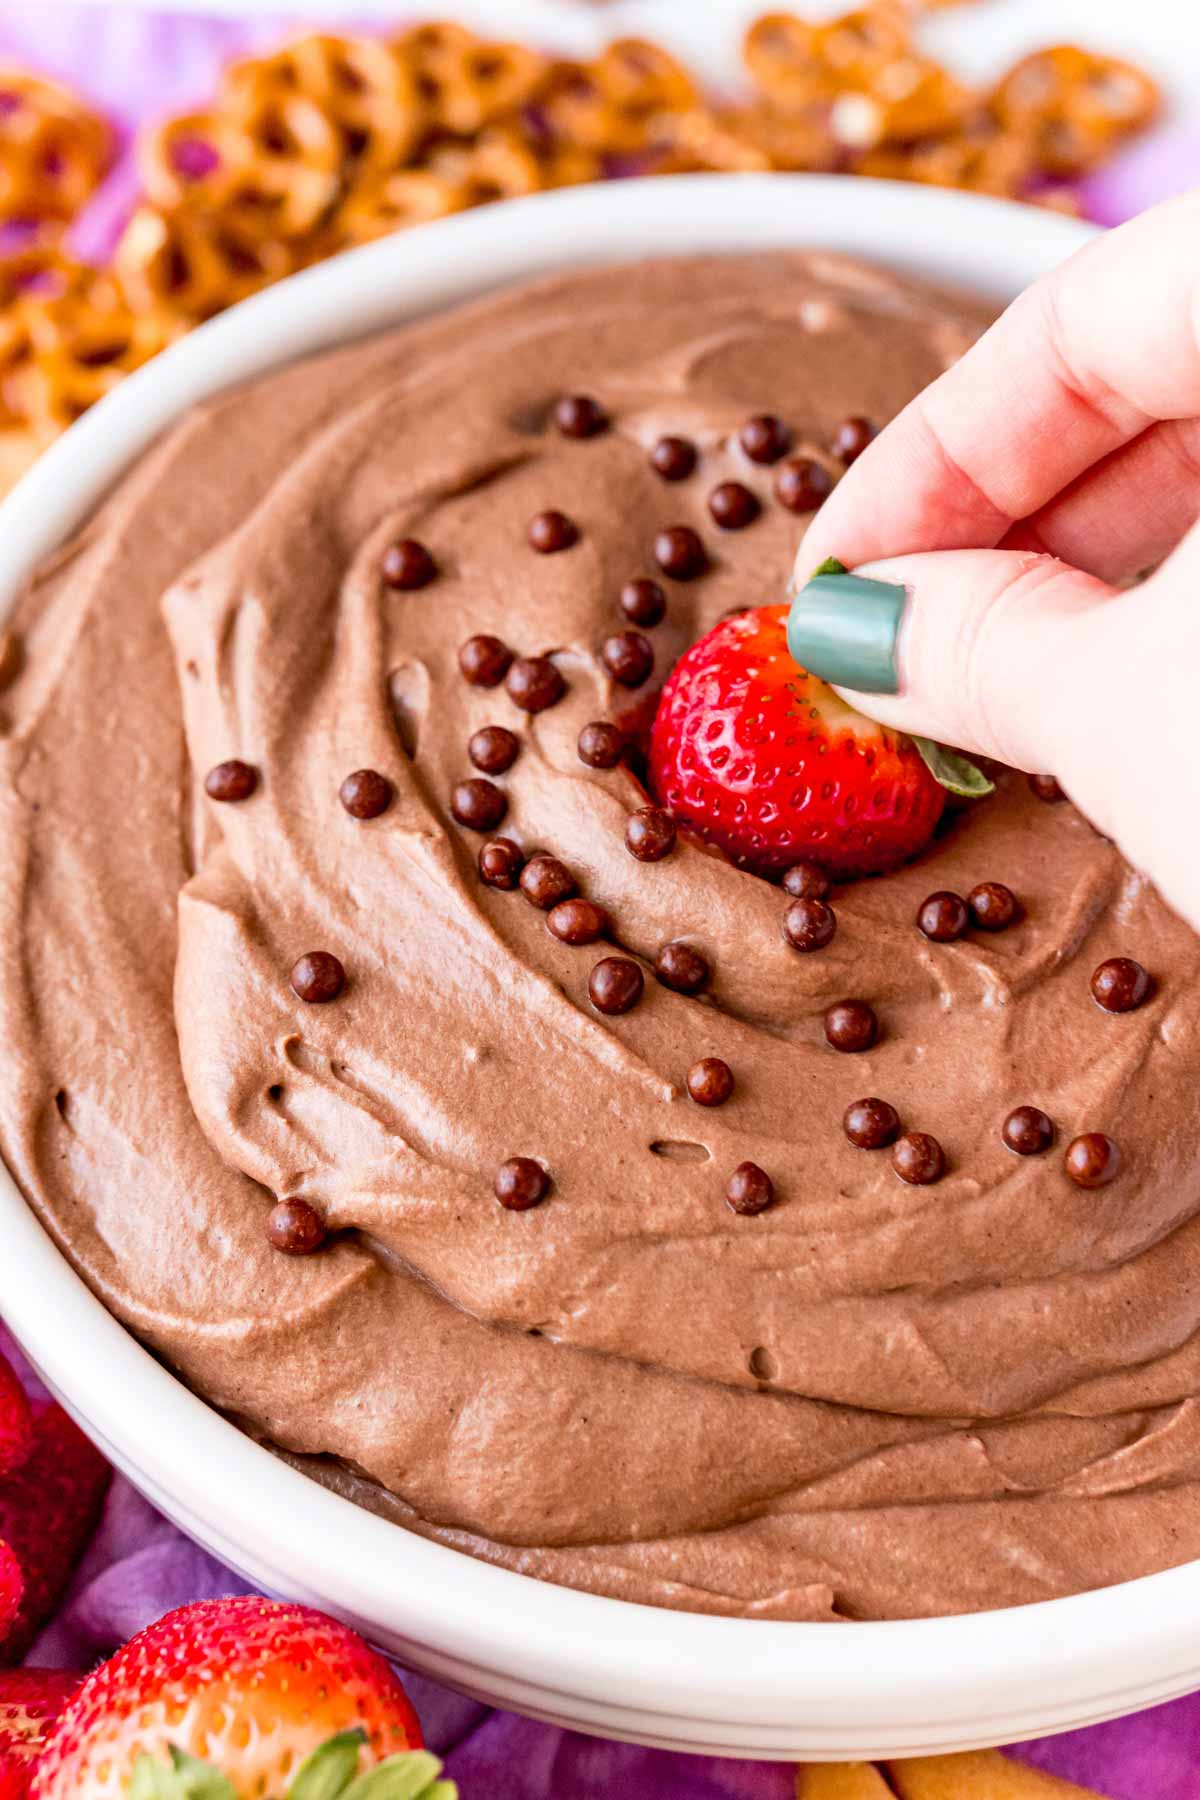 Woman's hand dipping strawberry into brownie batter dip